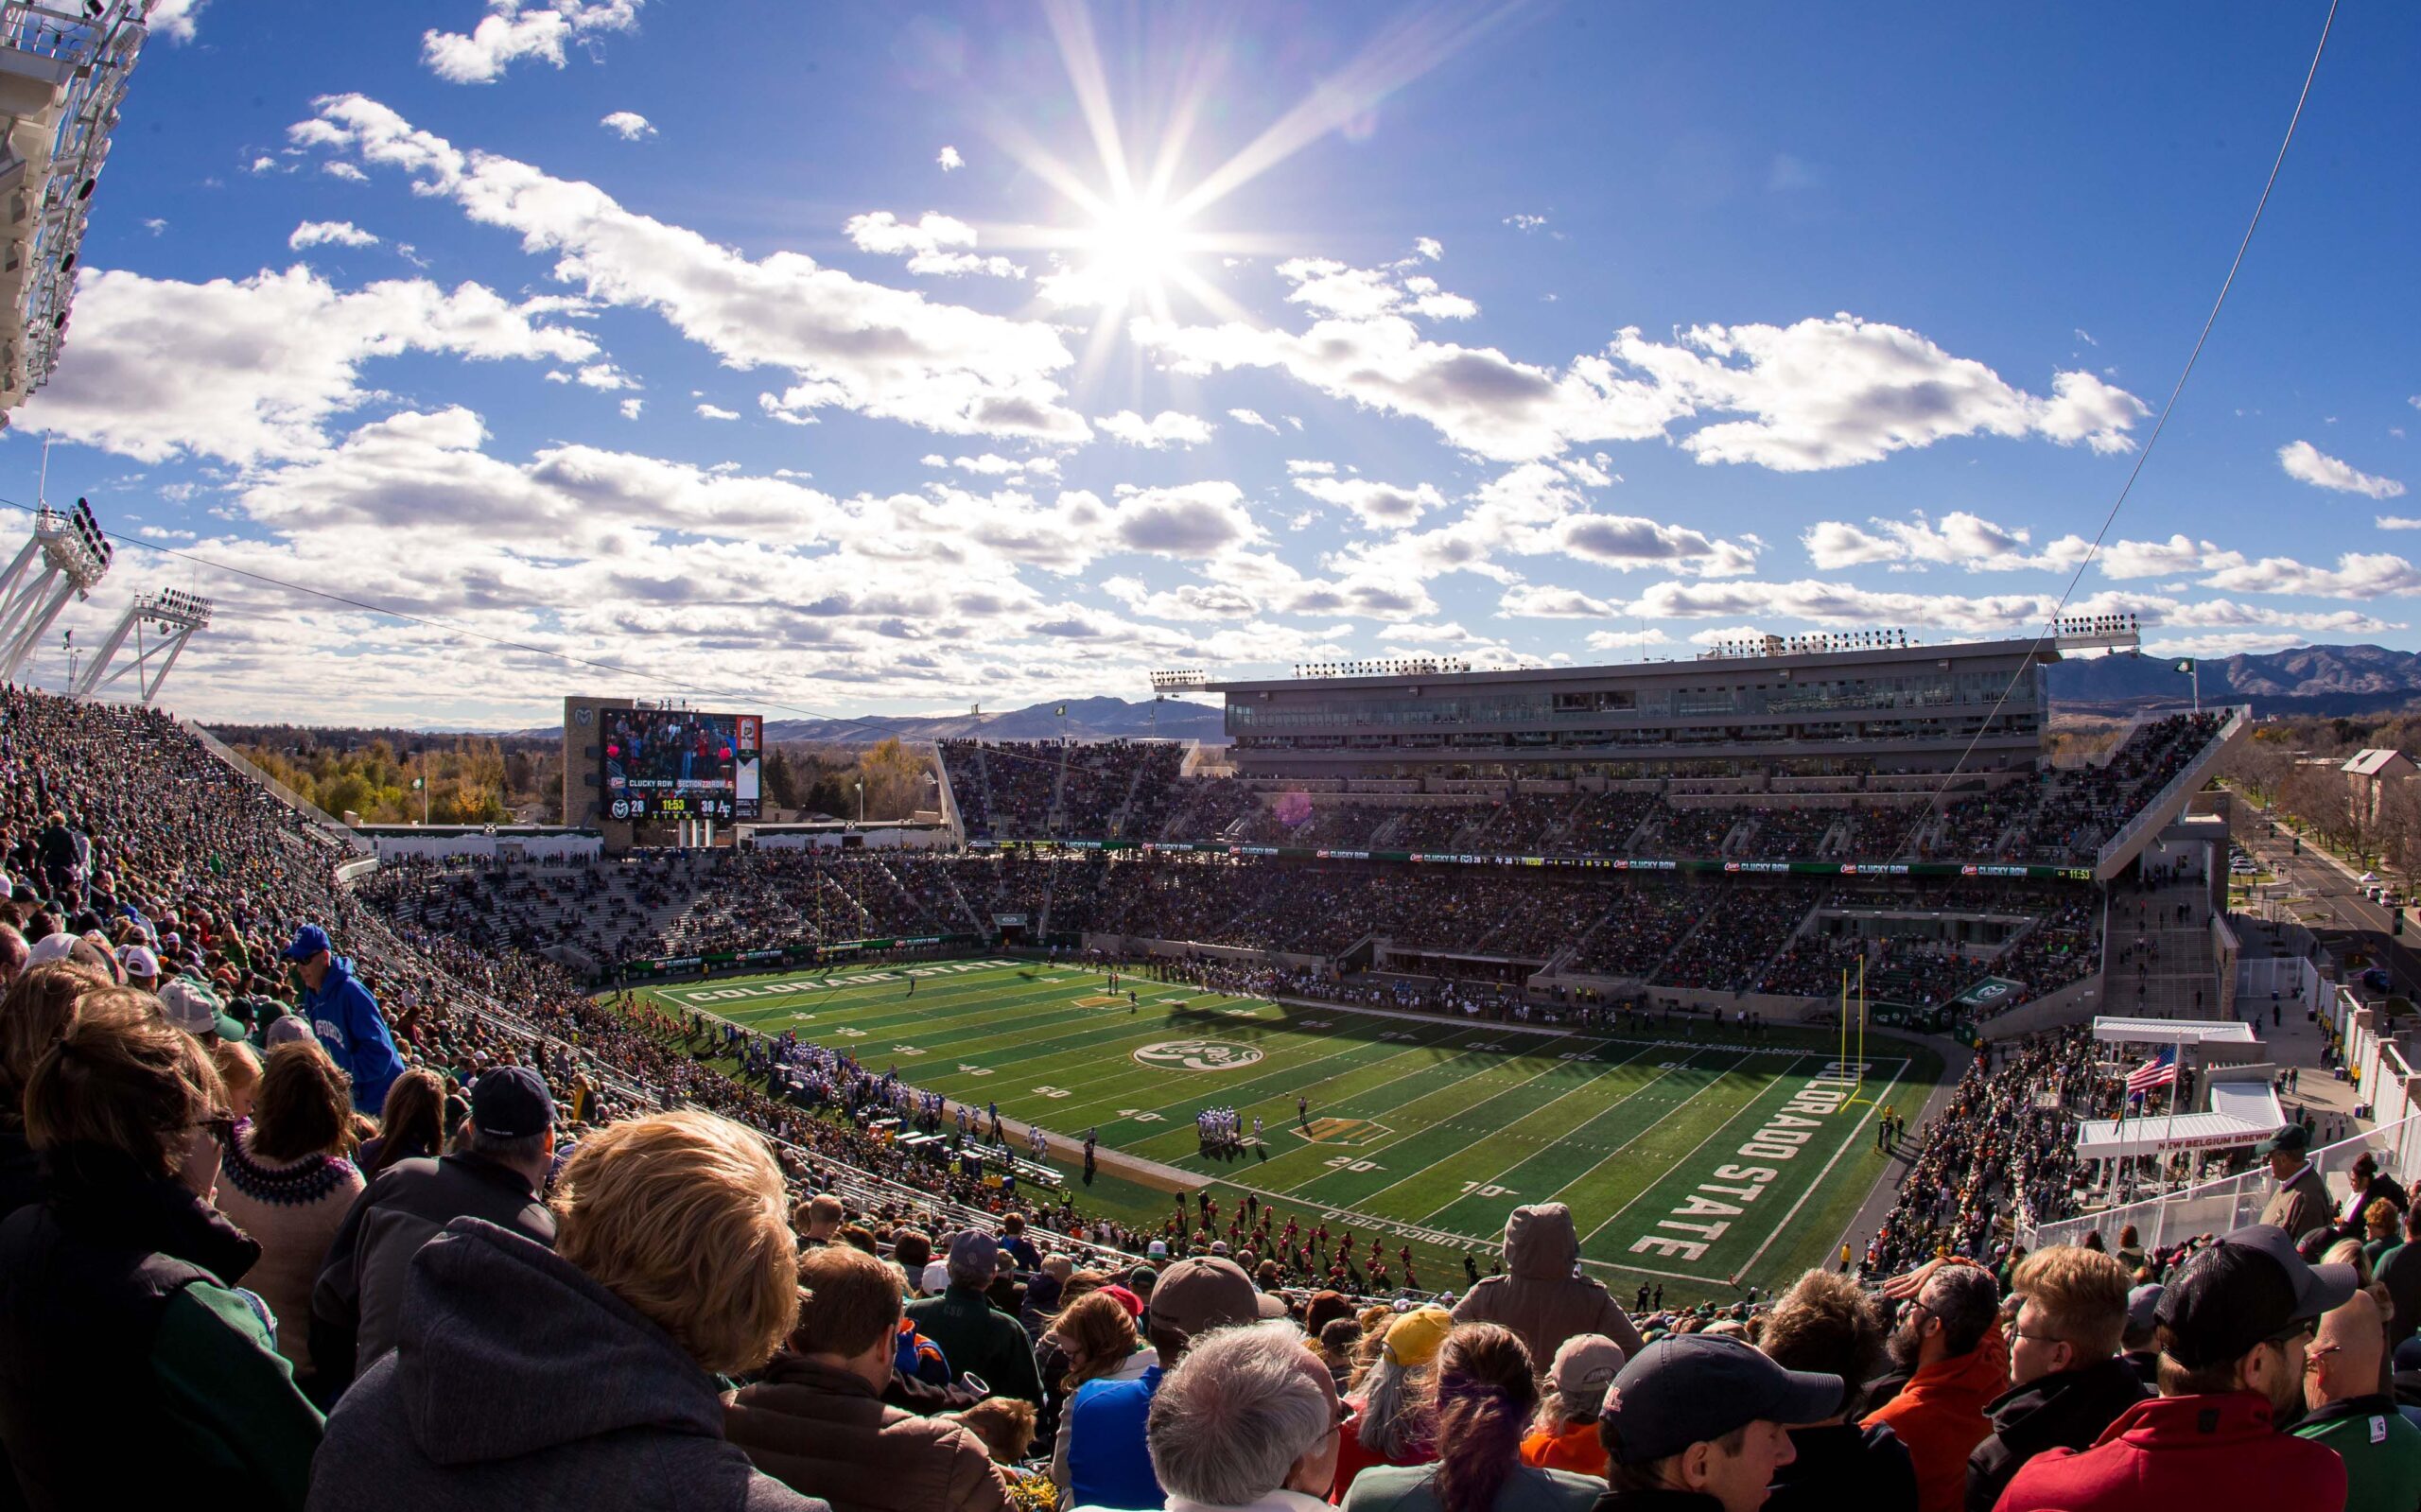 Canvas Stadium ranked in Top 25 by Popular Mechanics Mile High Sports